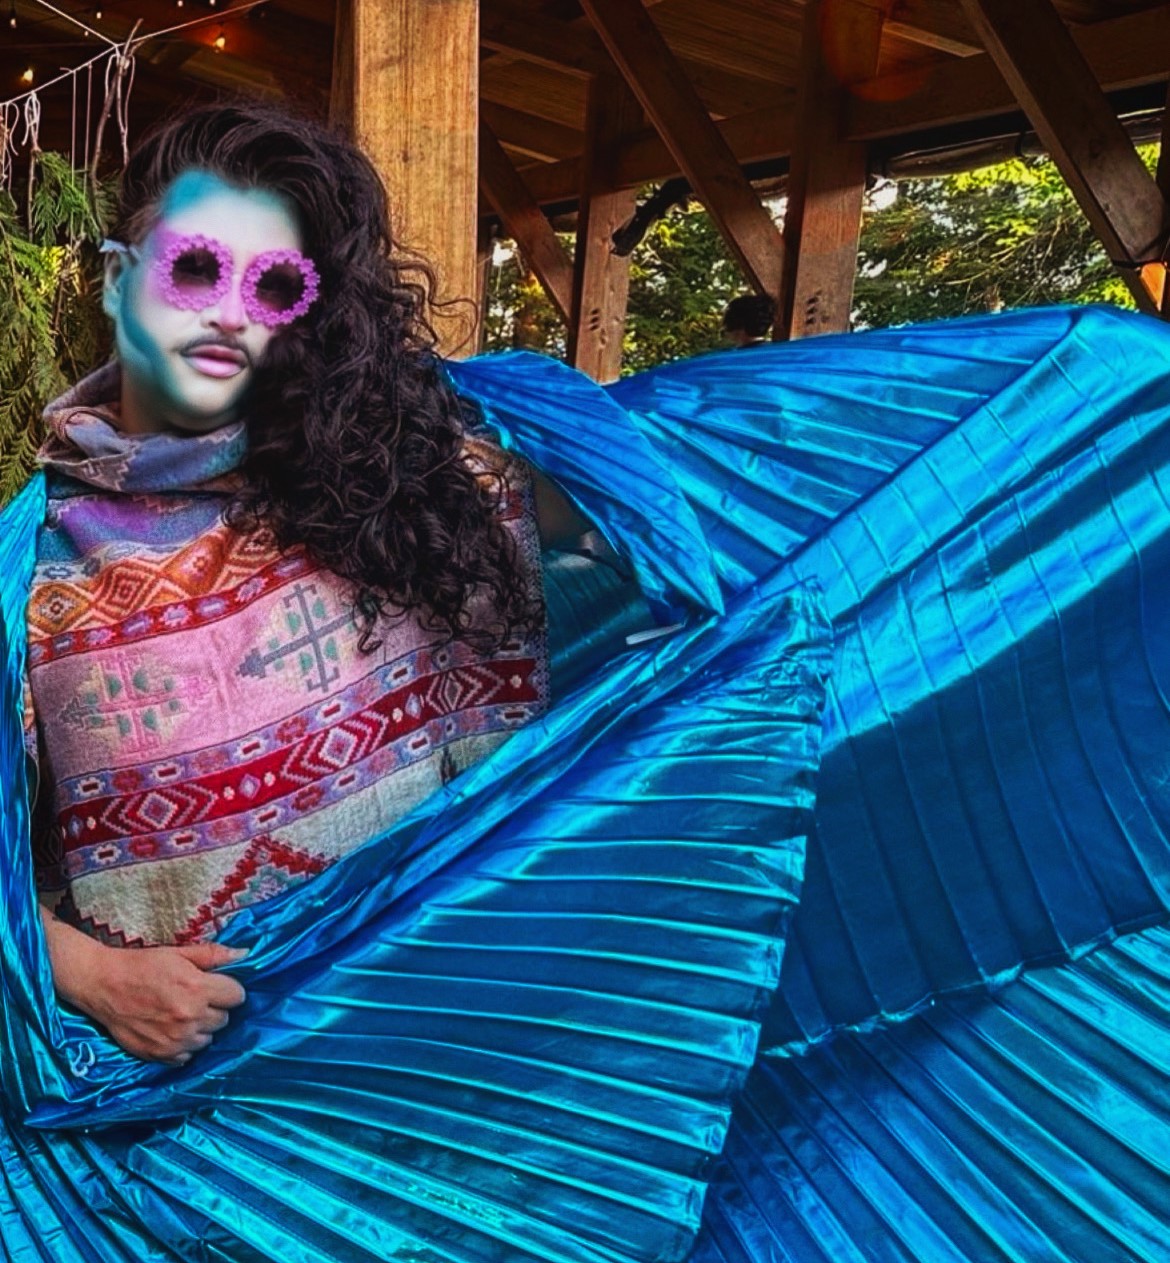 A person with medium-light skin tone, long, curly dark brown hair, blue and white face paint, and pink flower sunglasses, faces the camera and holds out a long shiny blue shawl.